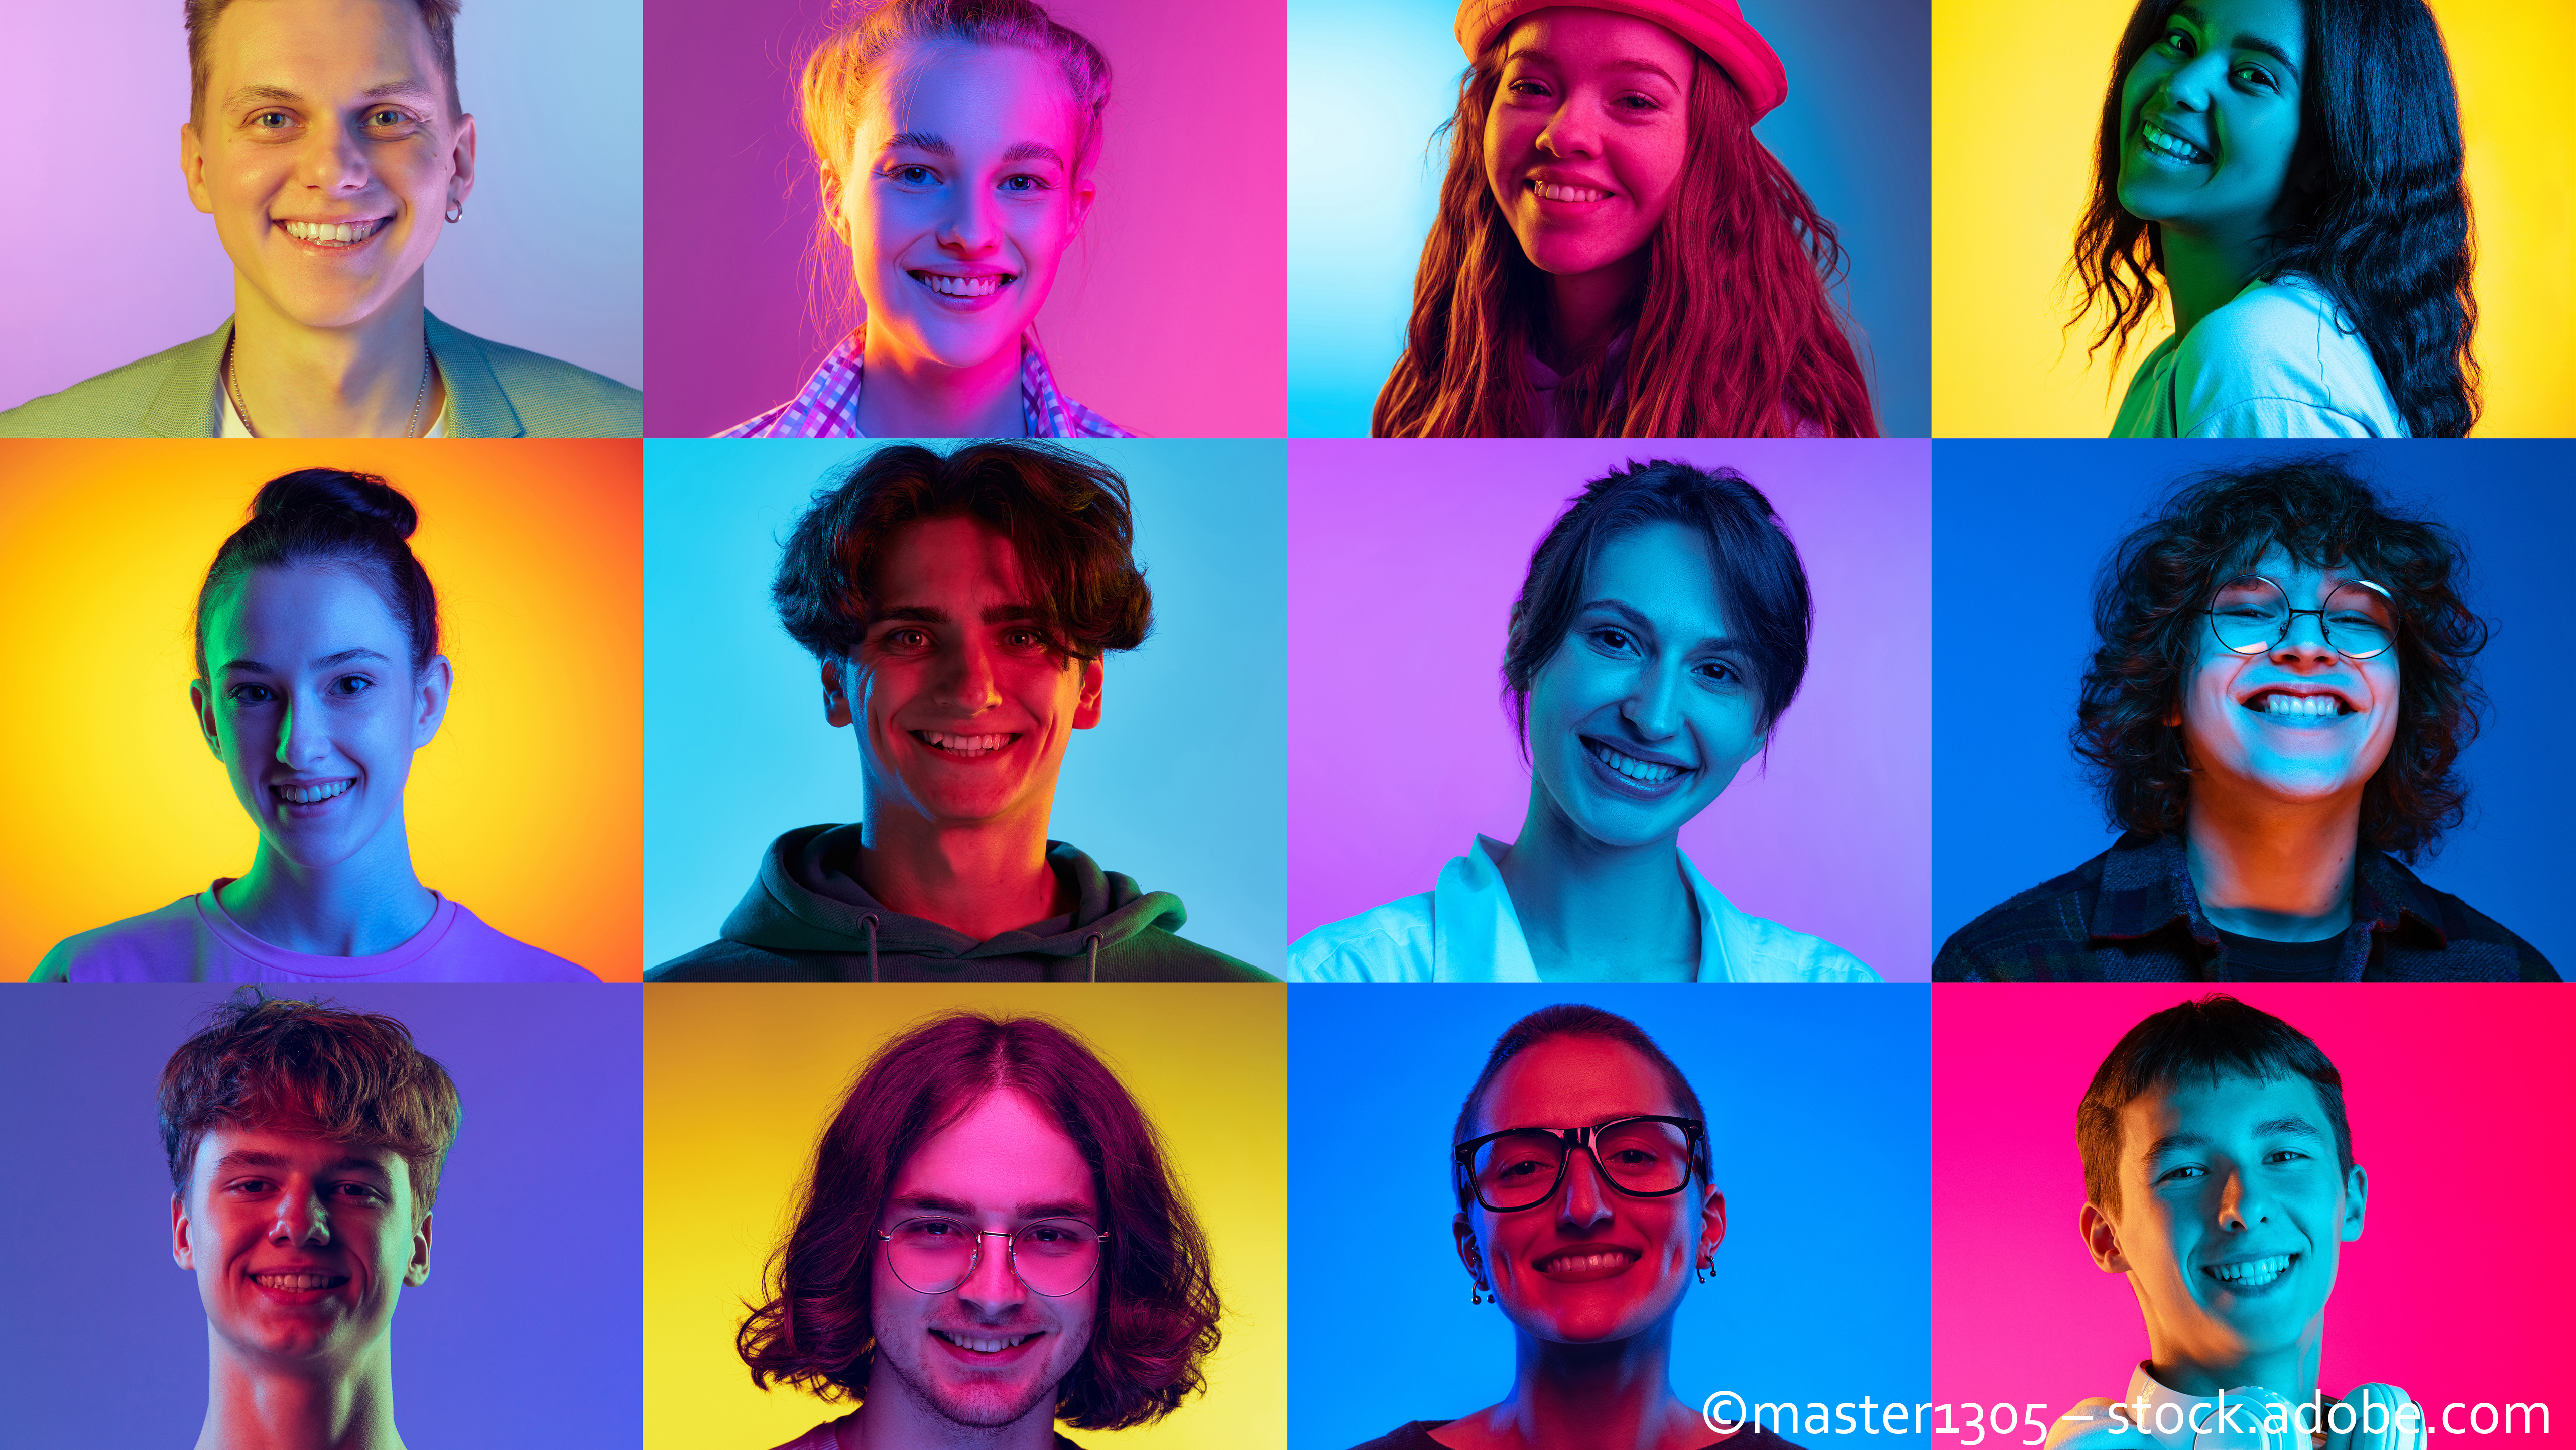 Collage made of portraits of young people of diverse age, gender and race posing, smiling over multicolored background in neon light